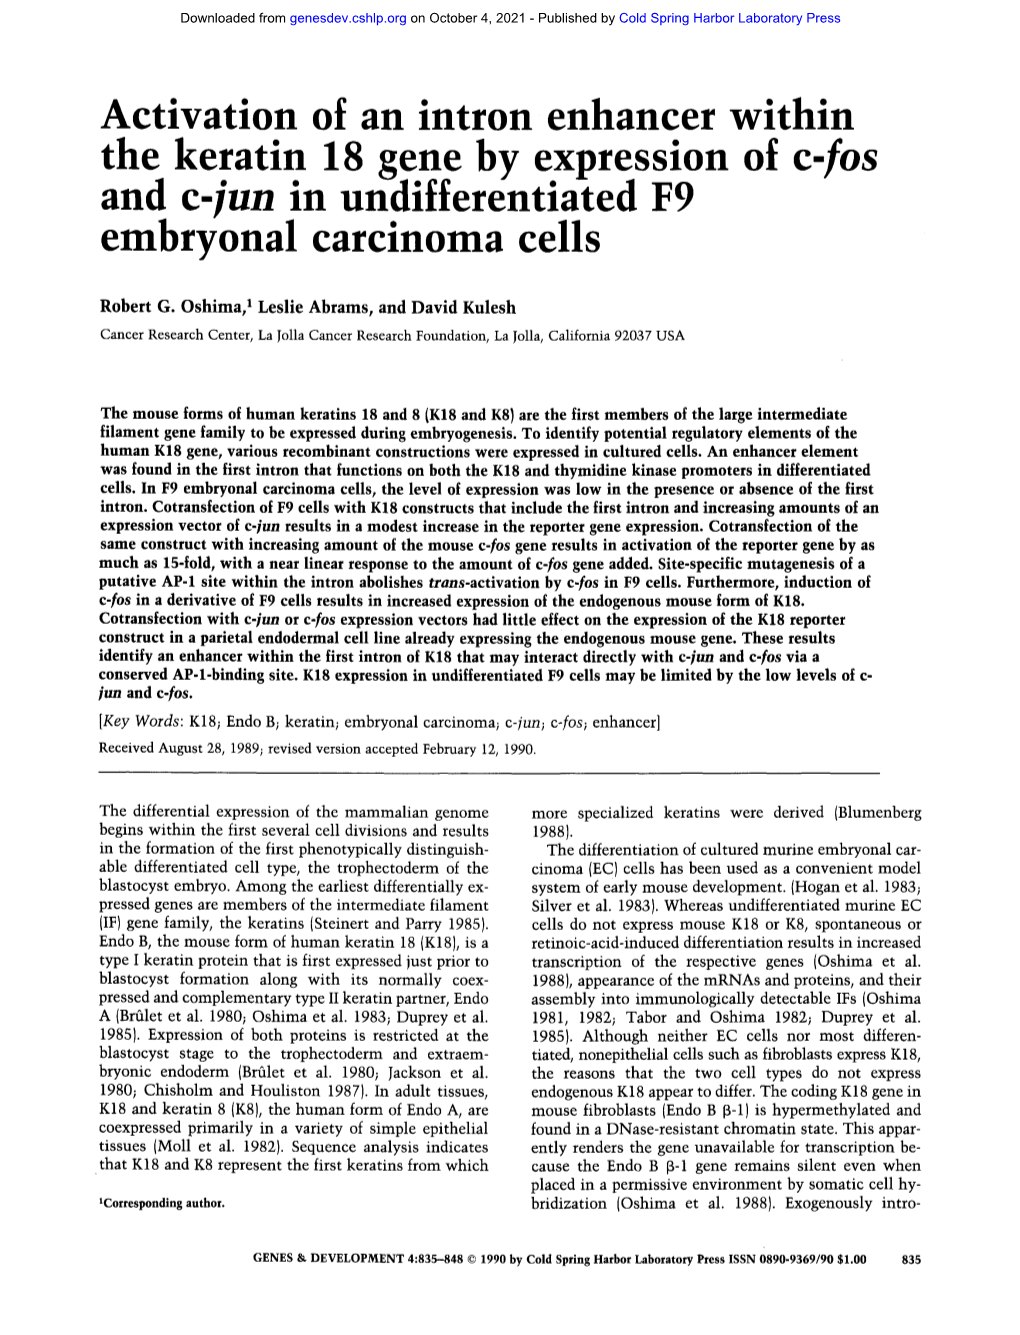 Activation of an Intron Enhancer Within the Keratin 18 Gene by Expression of C-Fos and C-Lun M Undifferentiated F9 Embryonal Carcinoma Cells